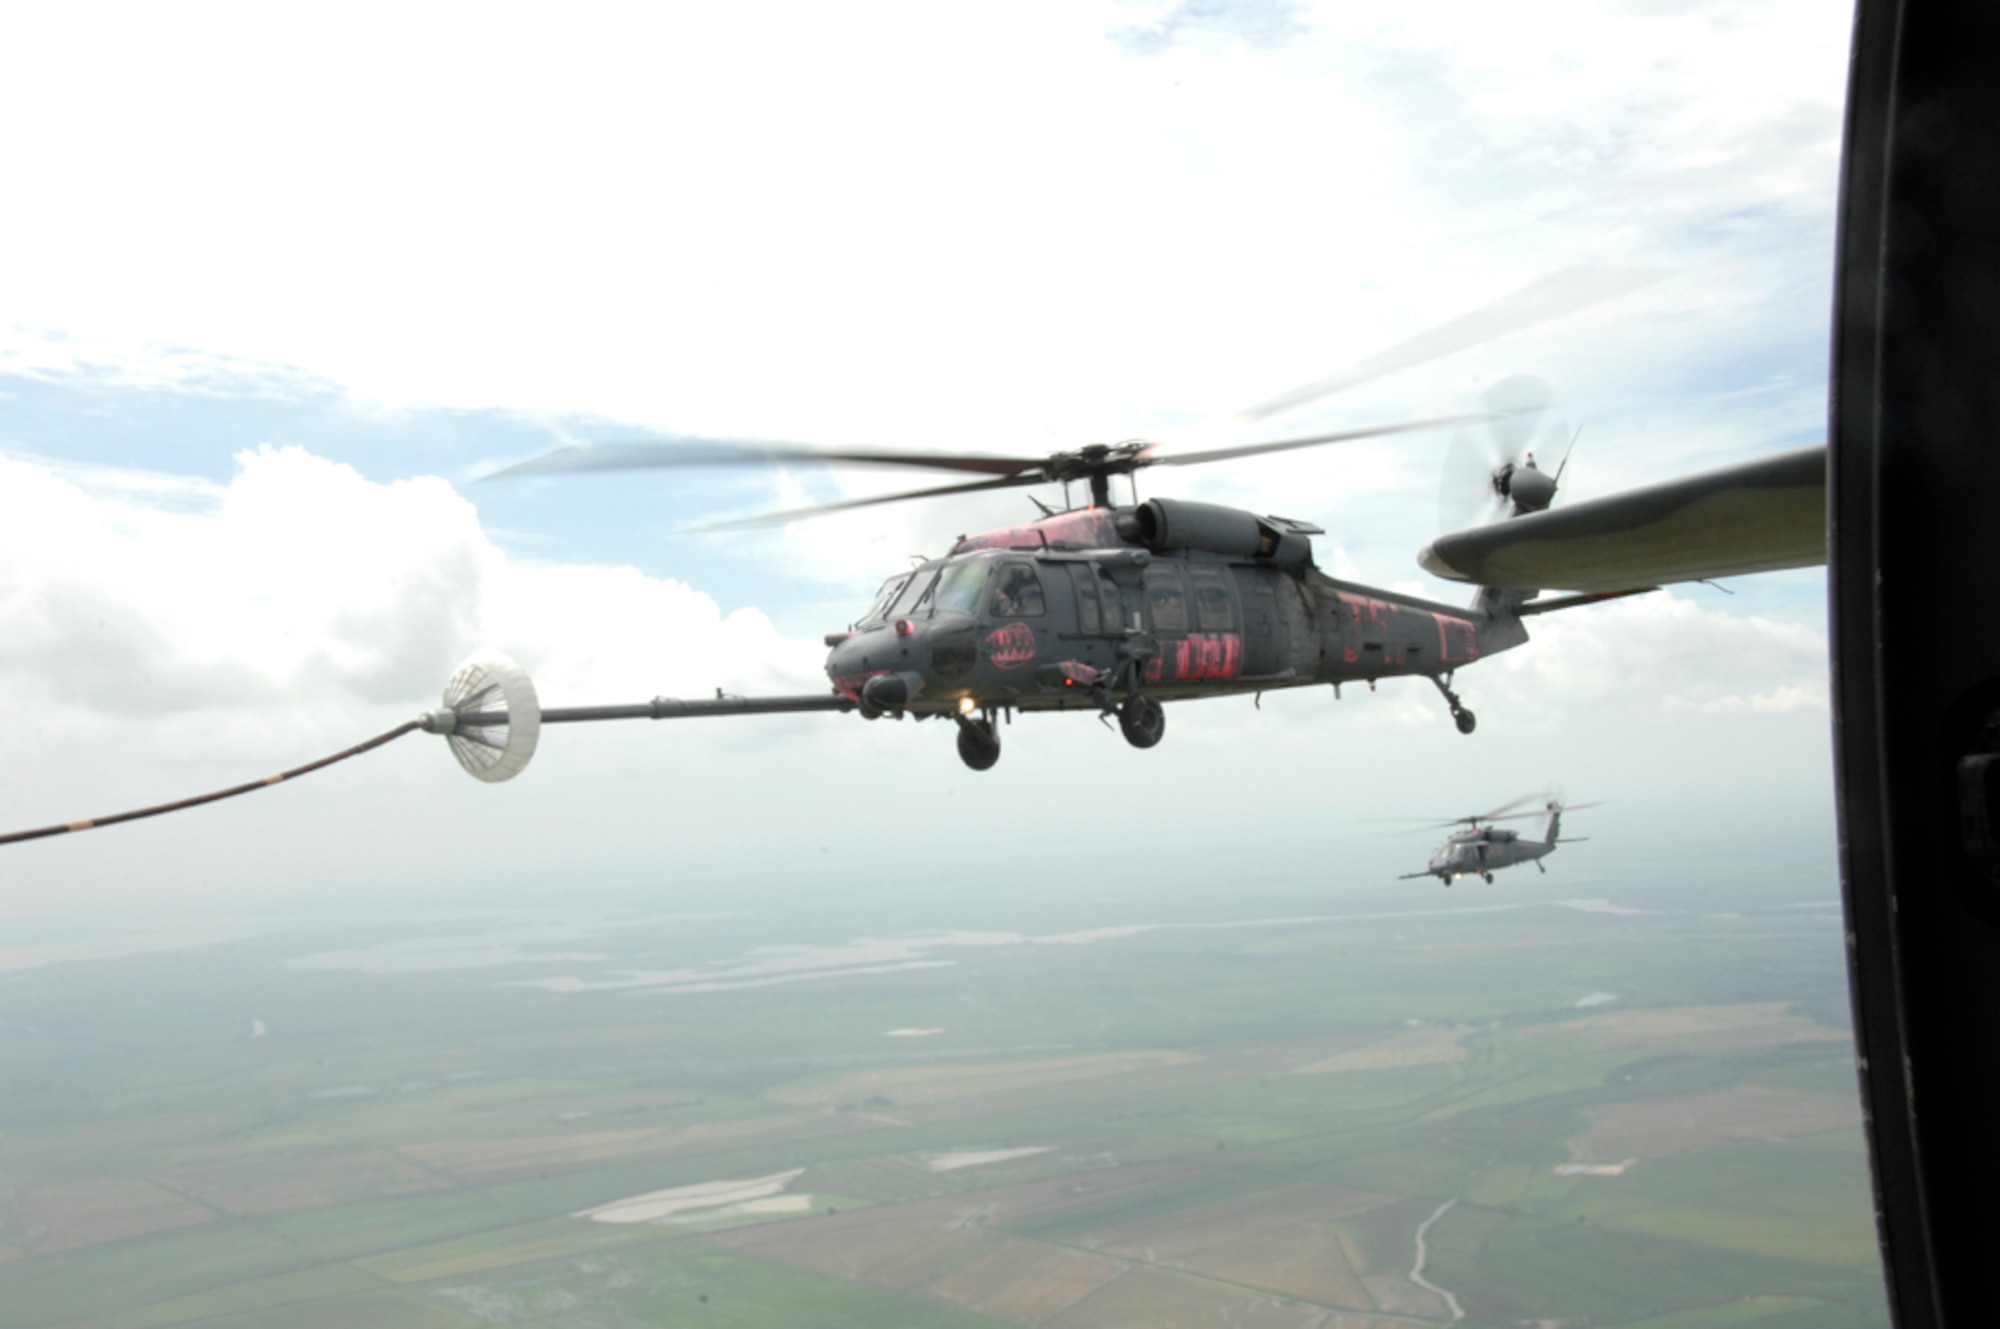 Two HH-60G Pave Hawks perform an aerial refueling mission with an MC-130P Combat Shadow over Louisiana Sept. 2. The aircraft and crew are from the 129th Rescue Wing based out of Moffett Federal Airfield, Calif. More than 80 Airmen from the 129th RQW deployed to Ellington Field, Texas, as part of Joint Task Force 129, which supported Hurricane Gustav rescue operations. Air National Guardsmen from the 106th Rescue Wing, Gabreski Airport, N.Y., and 176th Wing, Kulis Air National Guard Base, Alaska, were also part of the rescue task force. (U.S. Air Force photo by Tech. Sgt. Ray Aquino)